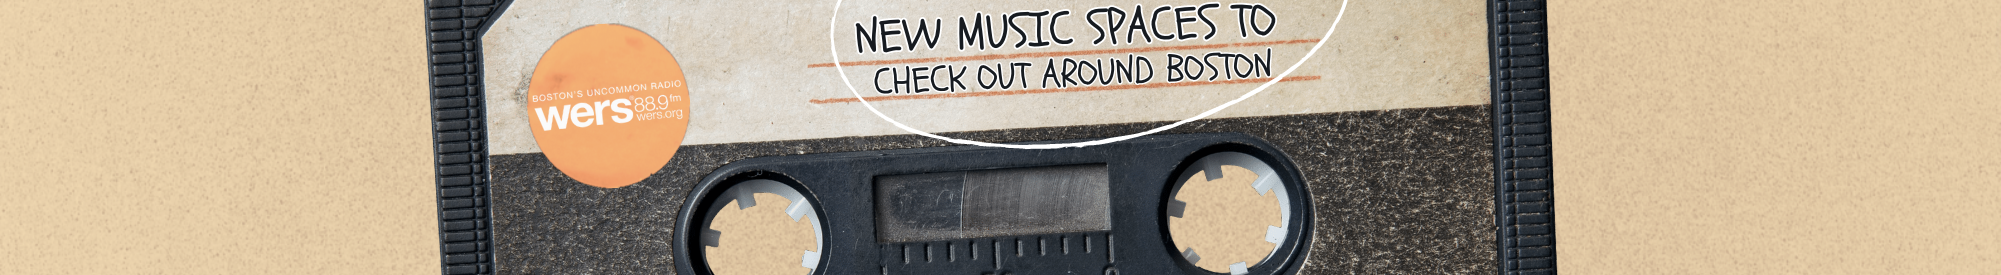 New Music Spaces, Boston, Suffolk Downs, Deep Cuts, Music Research Library, UnCommon Stage